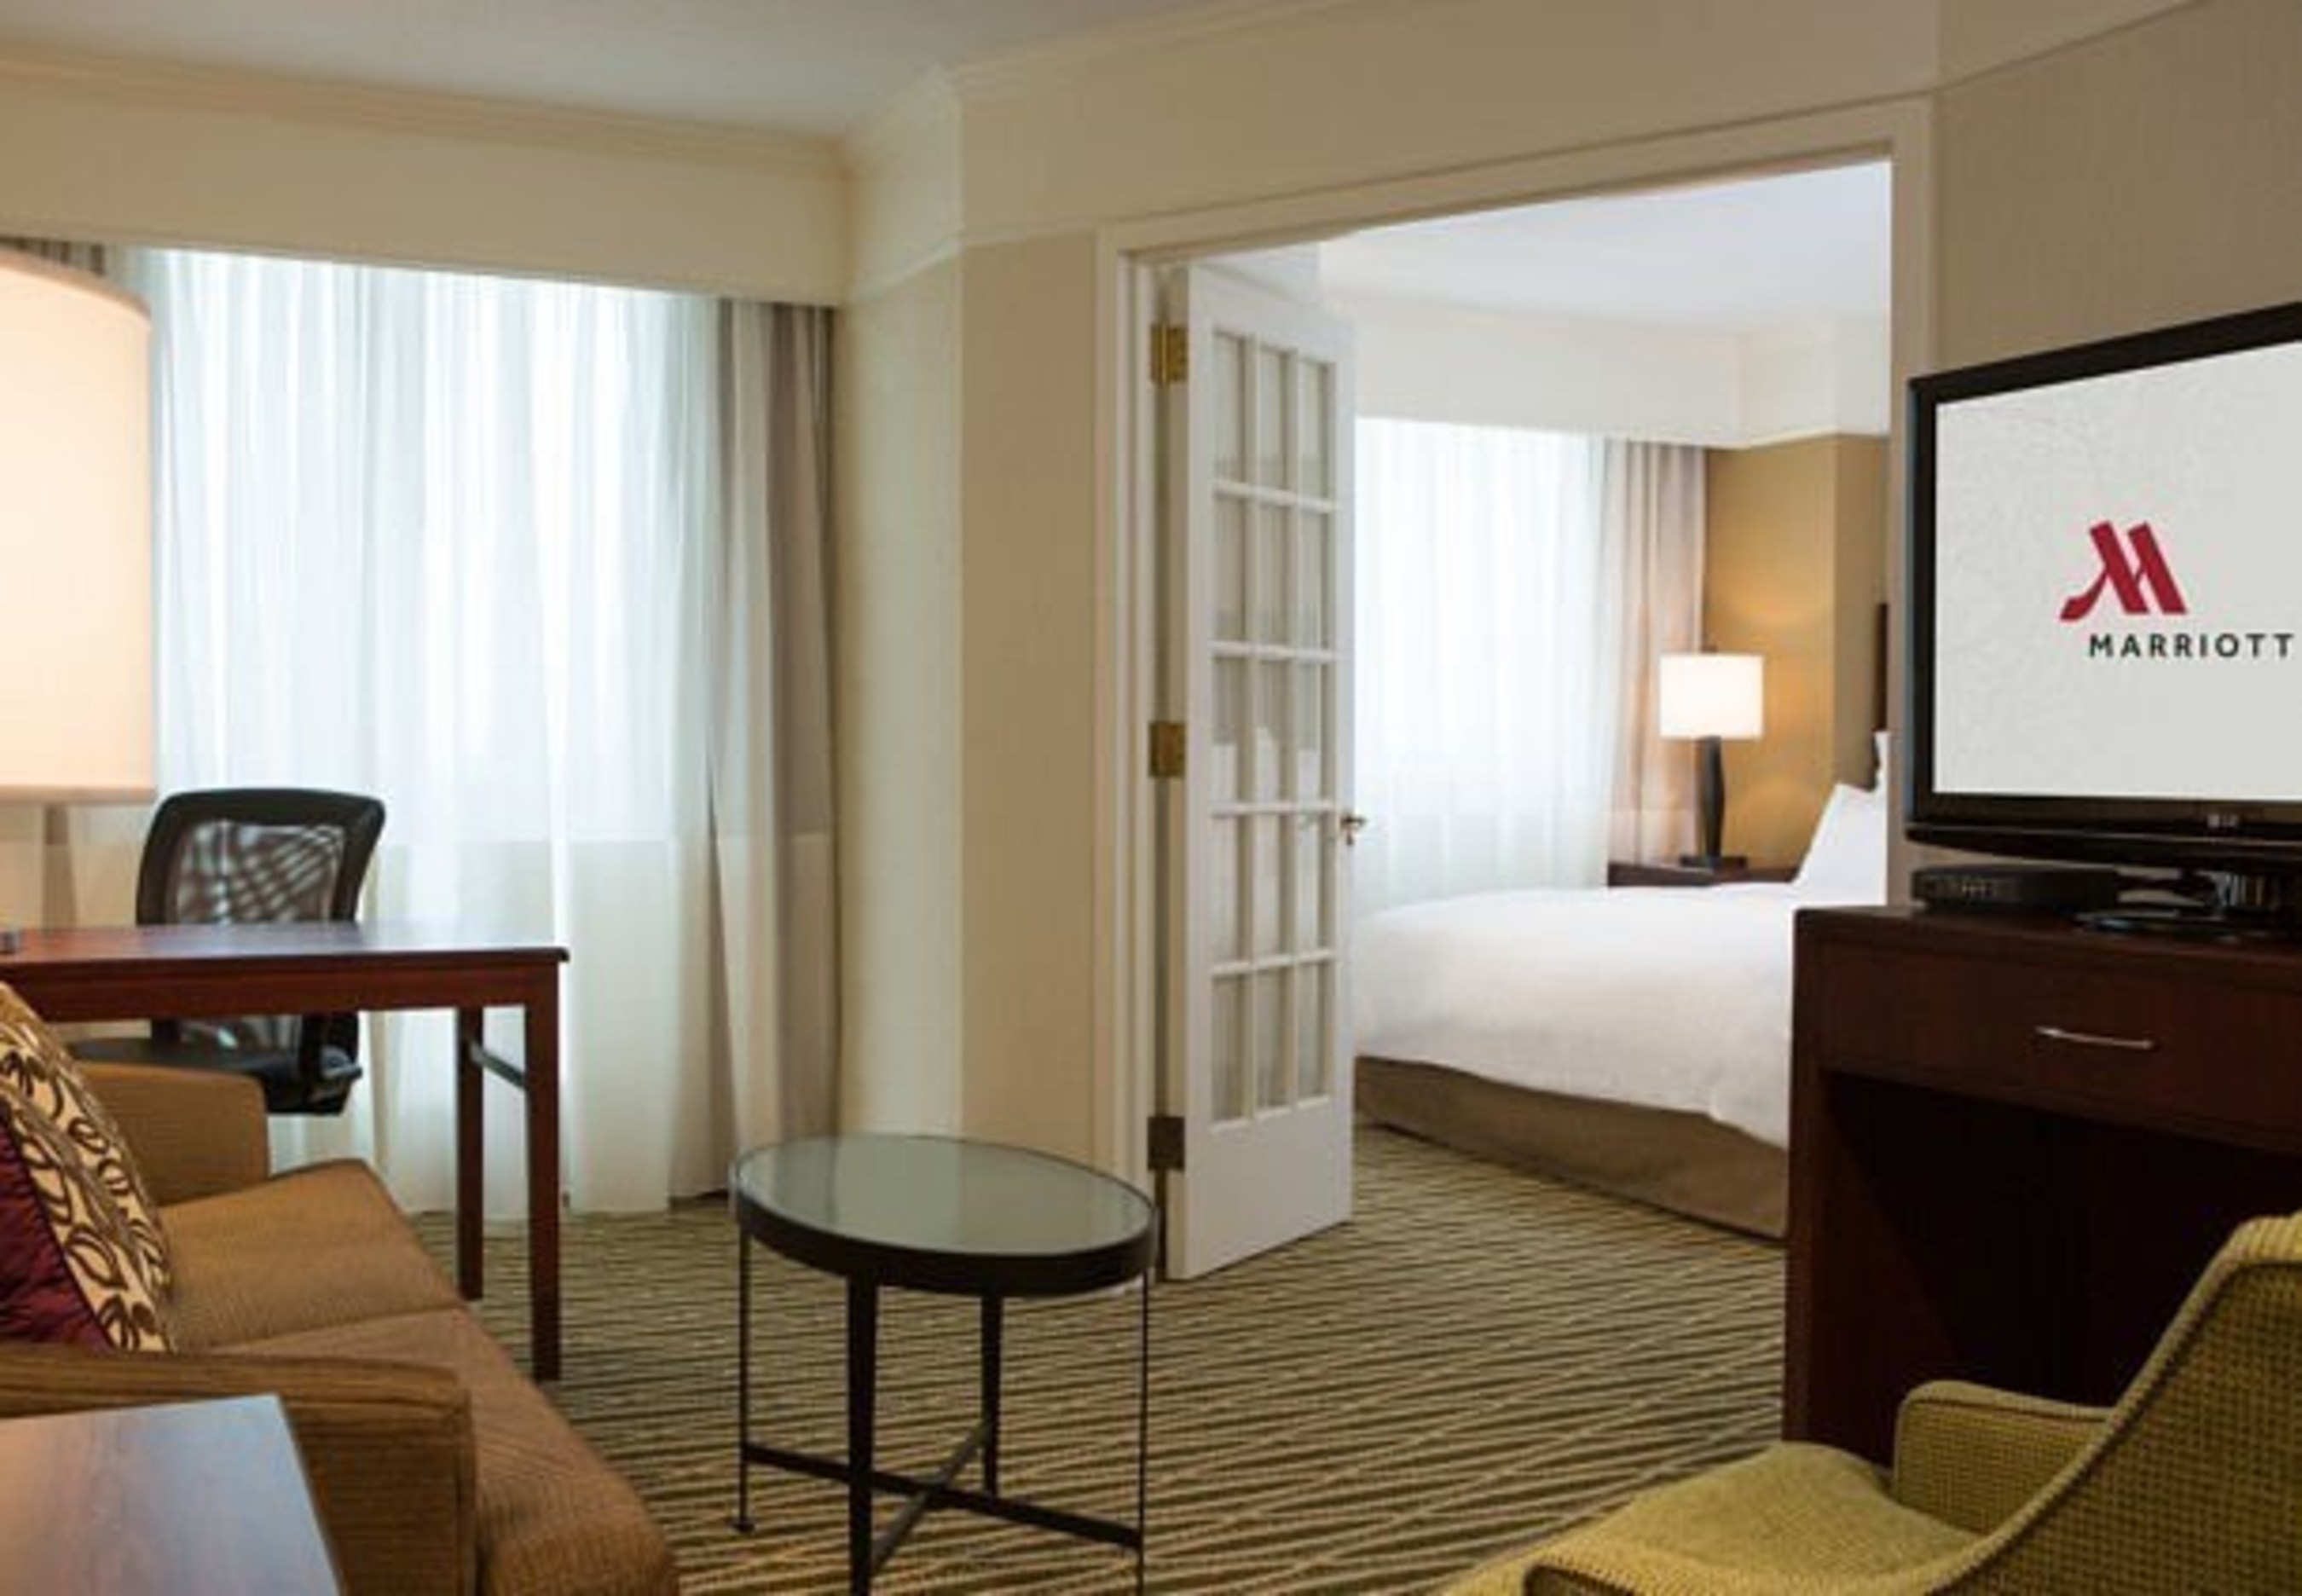 Washington Dulles Marriott Suites offers community heroes and their loved ones heading to Fairfax, VA for the 2015 World Police & Fire Games on June 26 to July 5, 2015, stylish suite accommodations just 20 minutes from the events. For information, visit www.marriott.com/IADAP or call 1-703-471-9500.